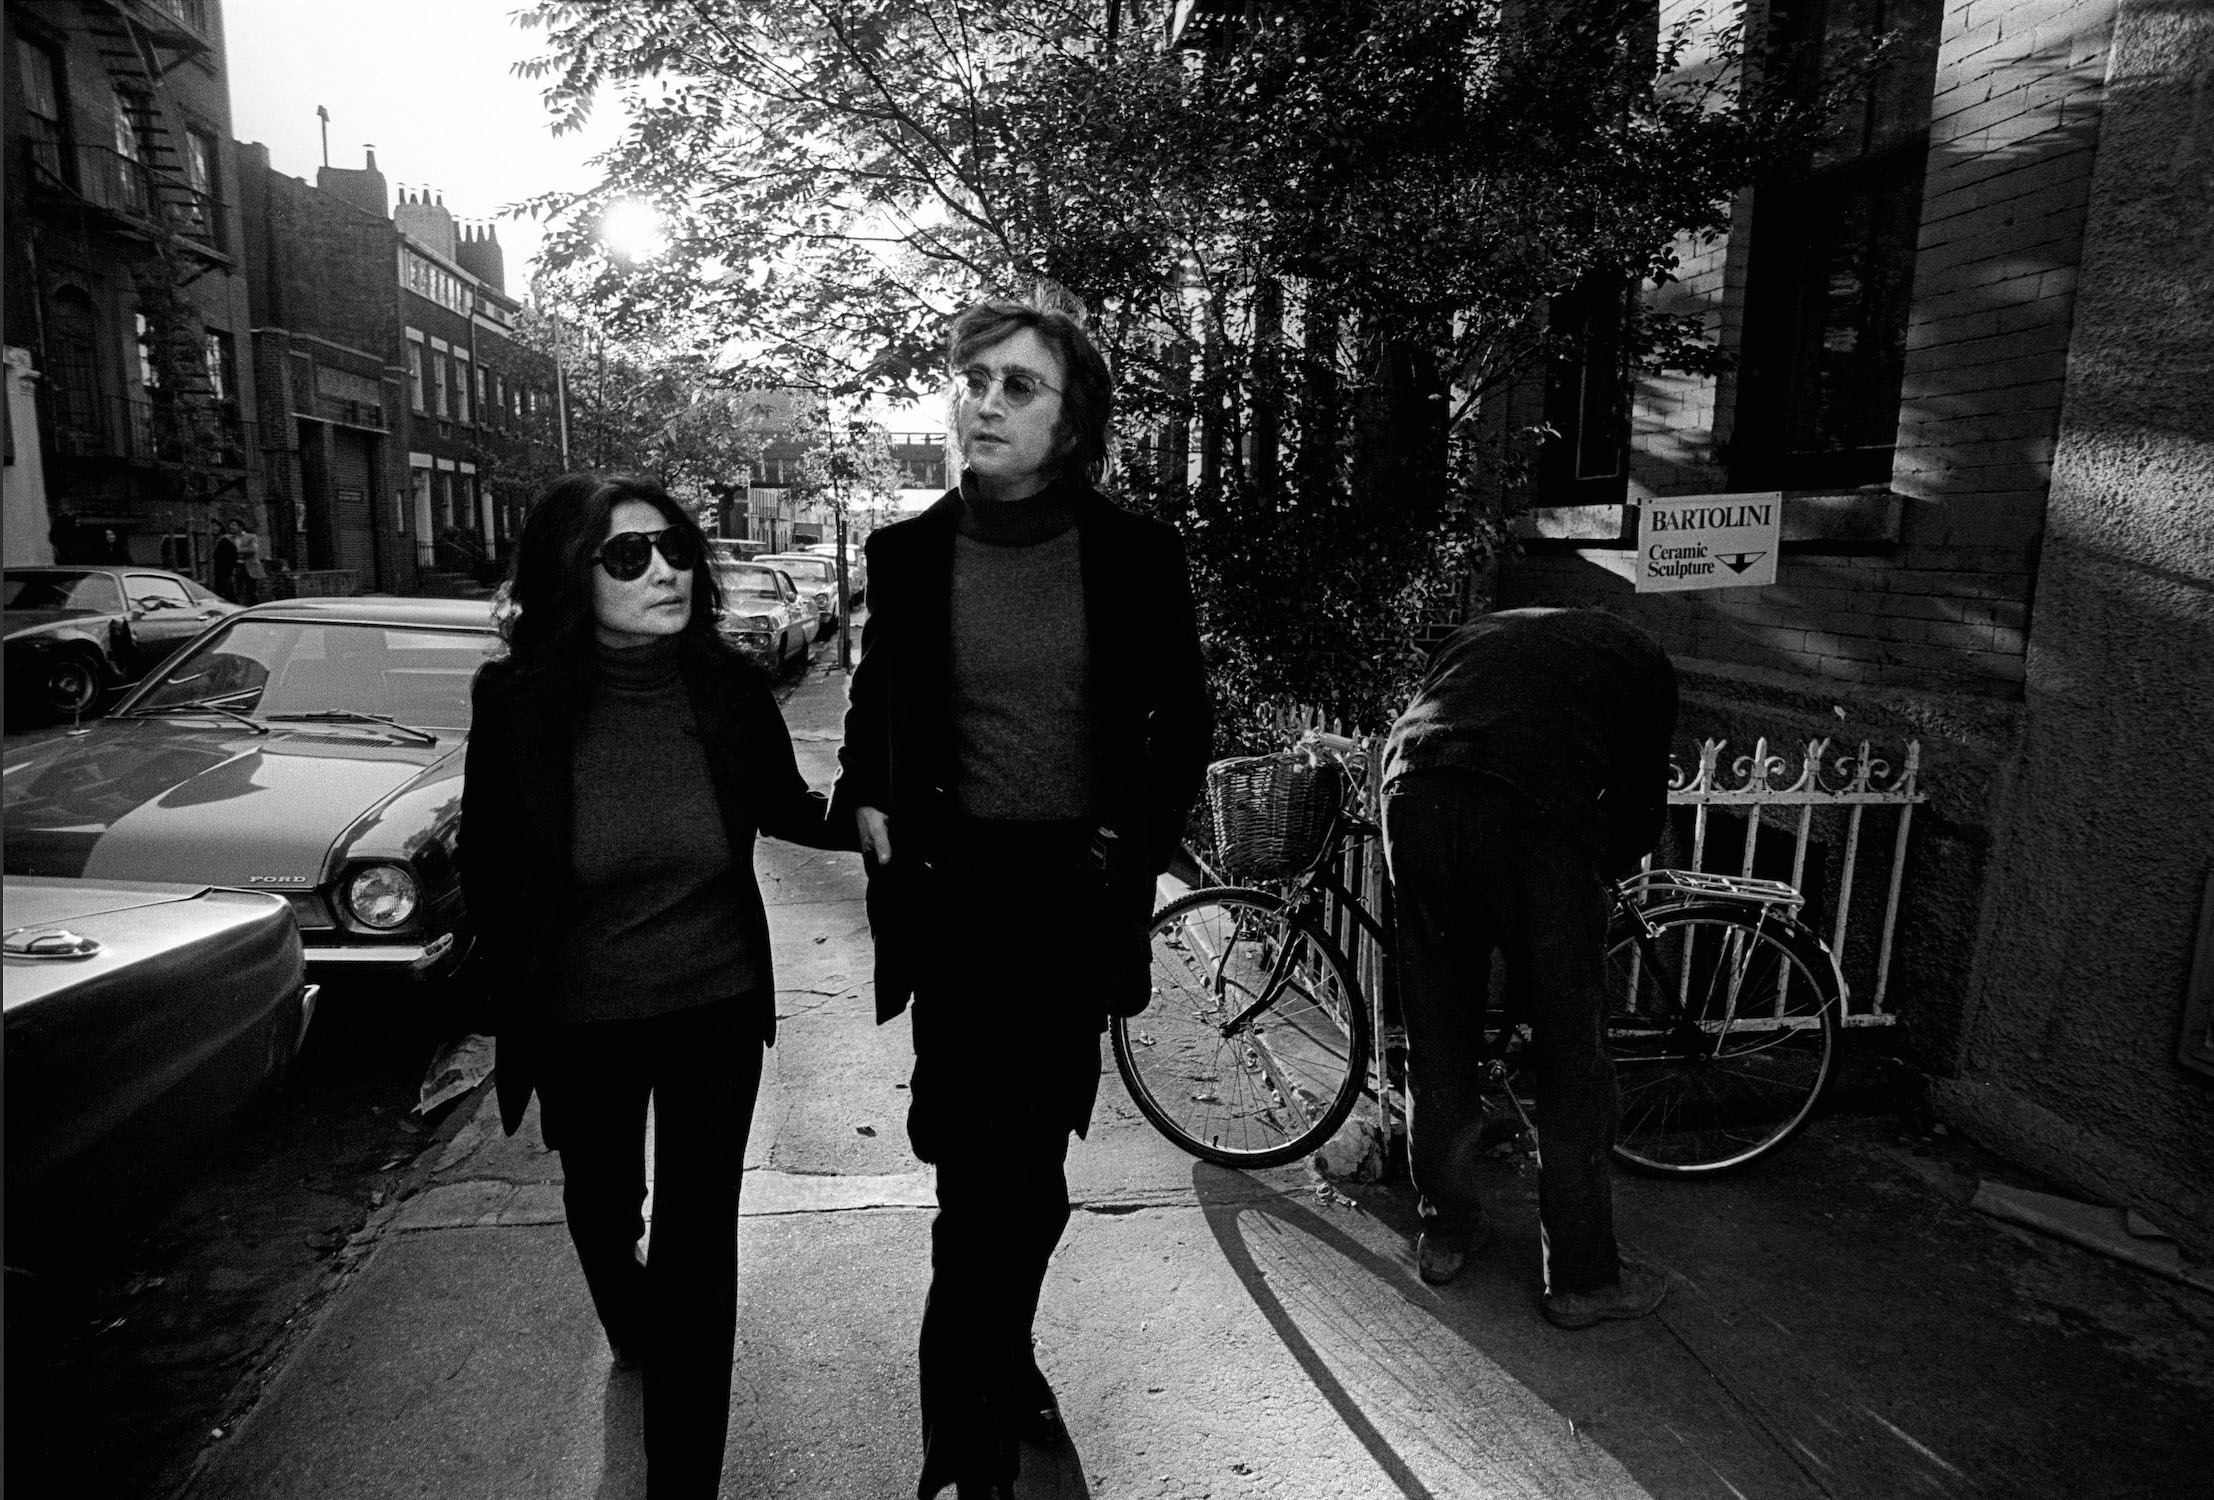 Previously Unseen Photographs of John Lennon and Yoko Ono at Home